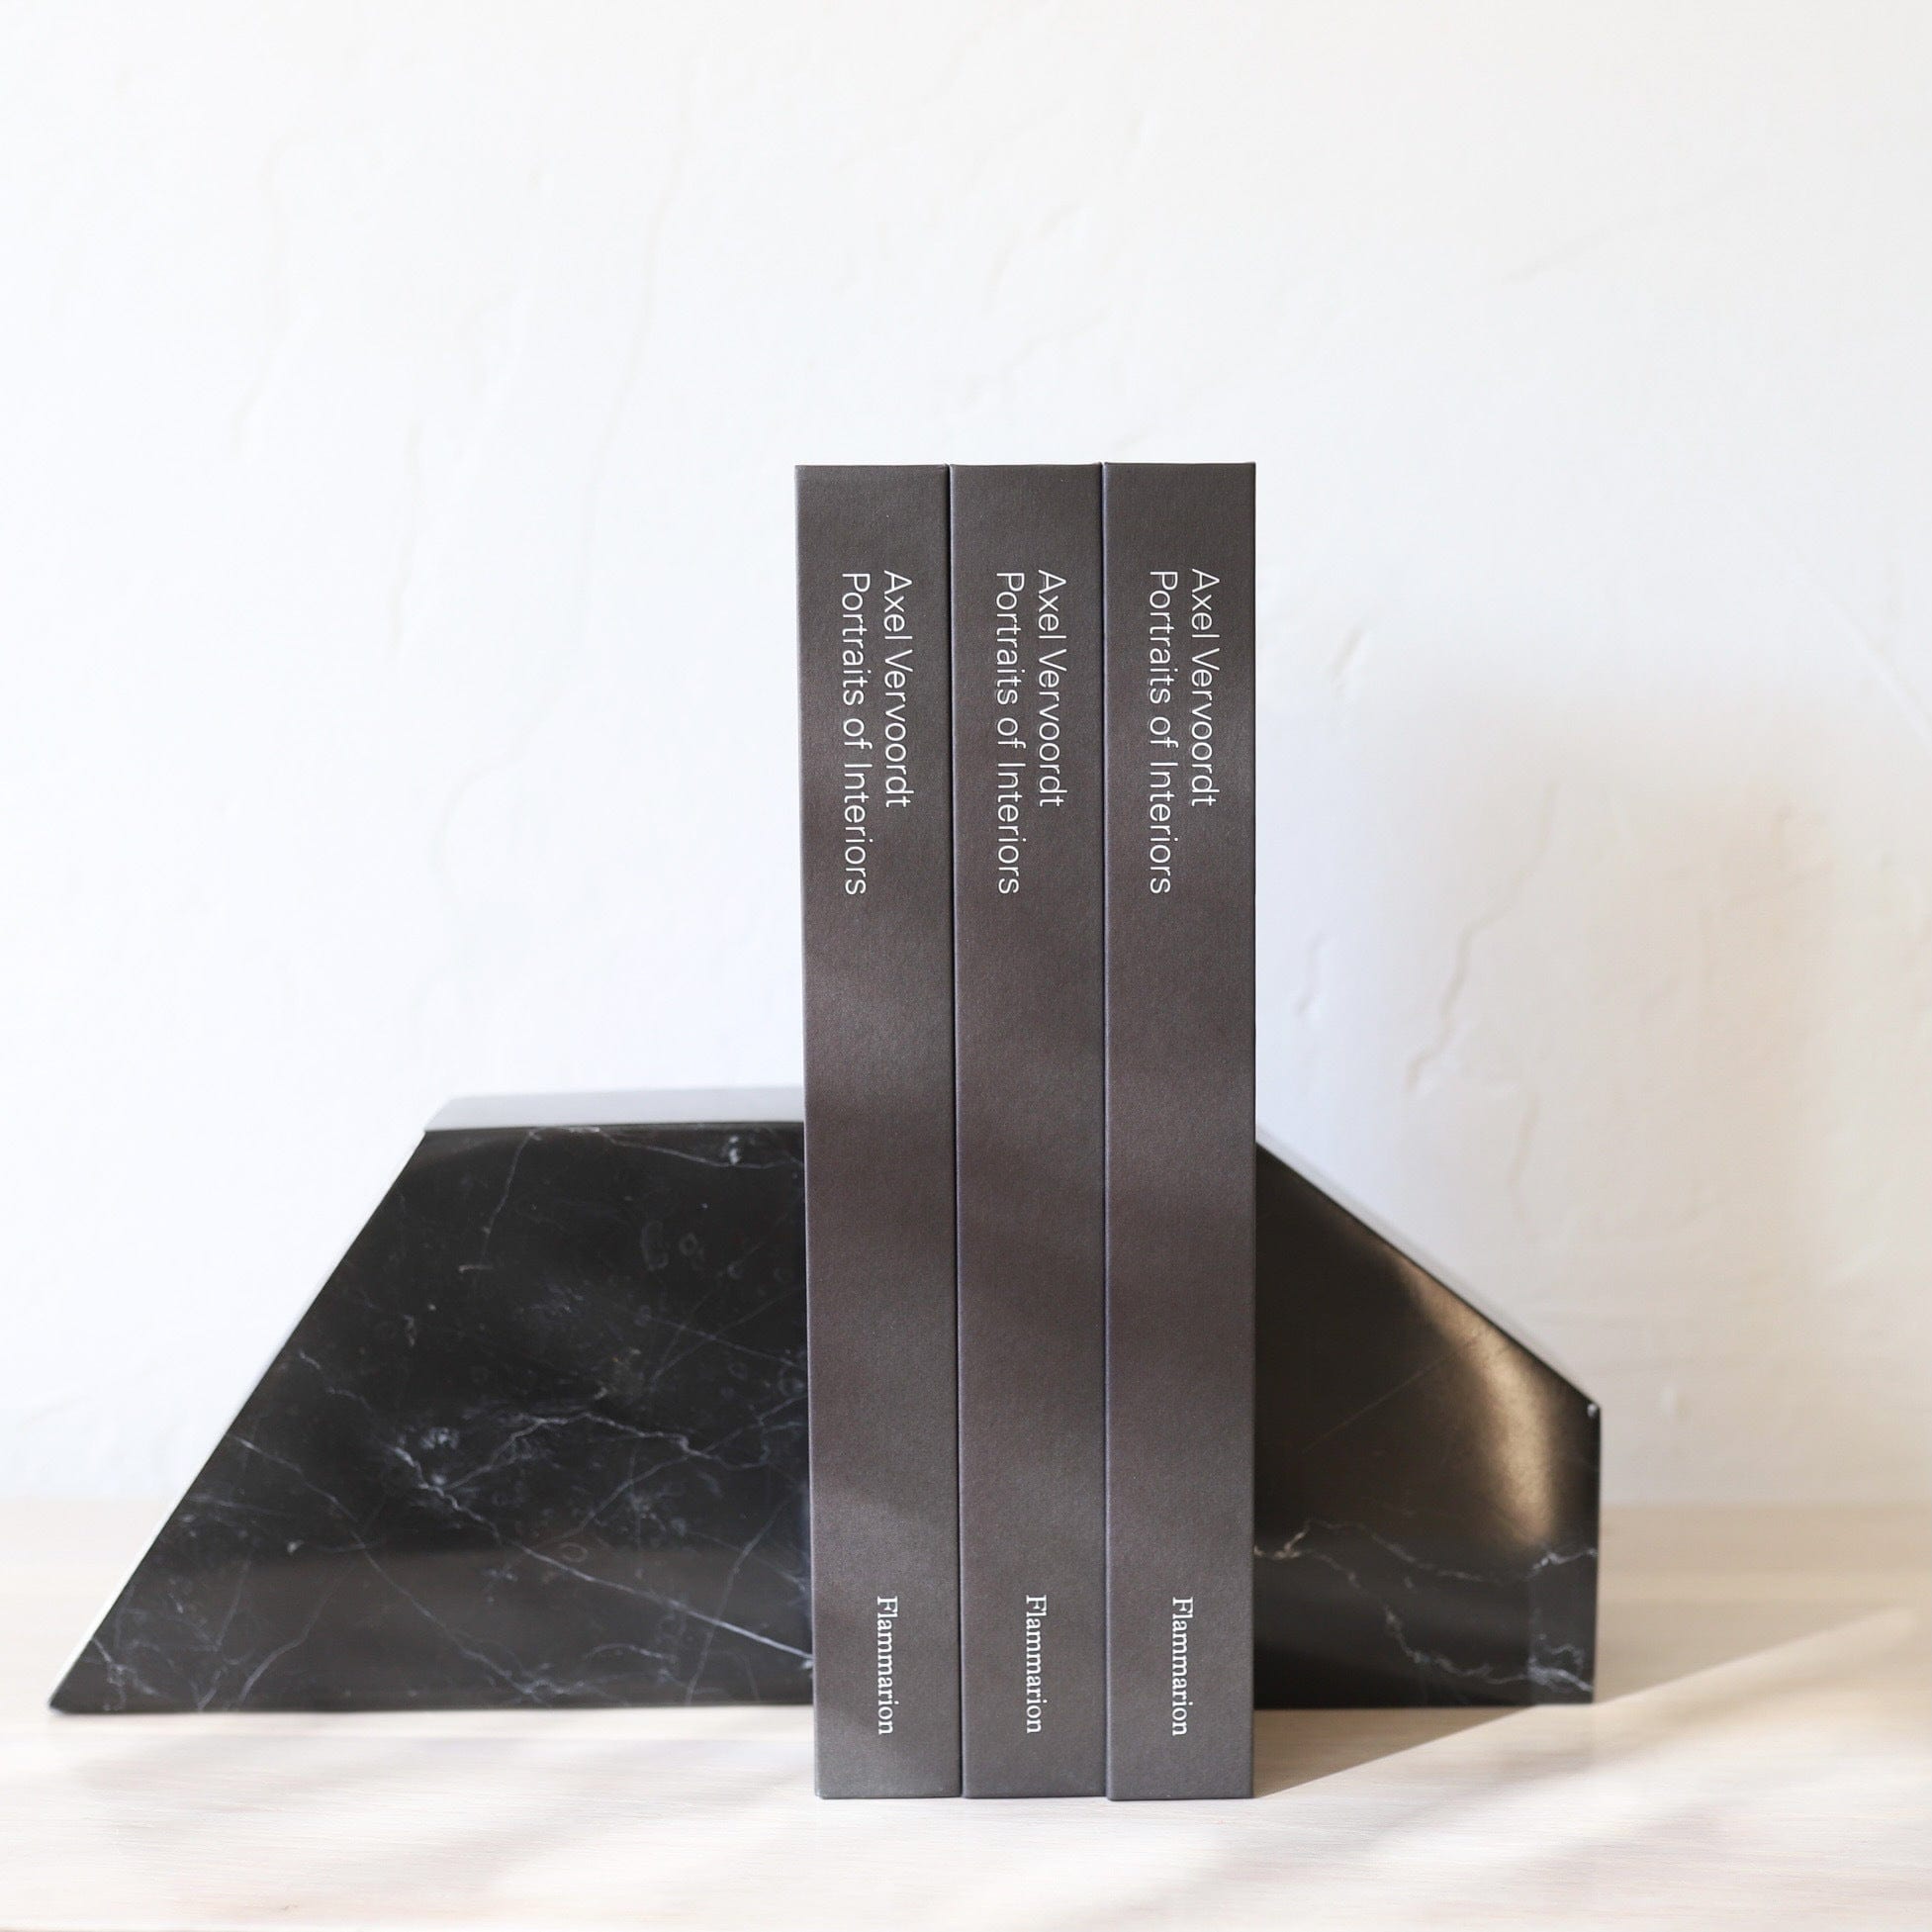 CDMX Decor Marble Bookends | CURBSIDE PICKUP ONLY